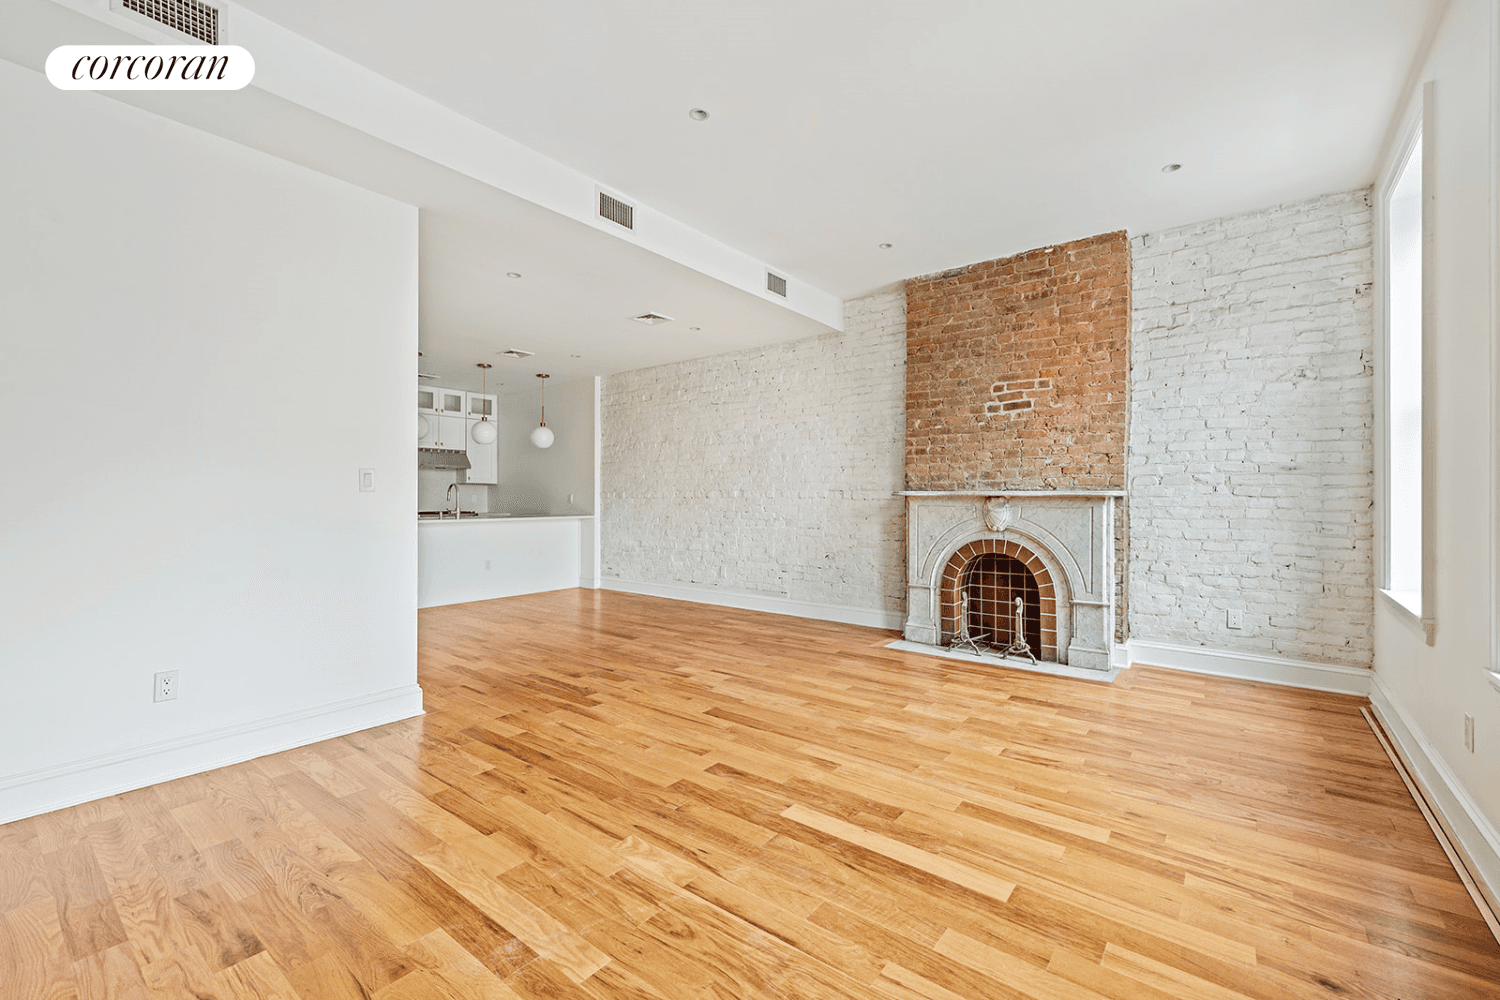 Glorious renovated, light filled two bedroom, two bathroom aparment located in the heart of Cobble Hill.